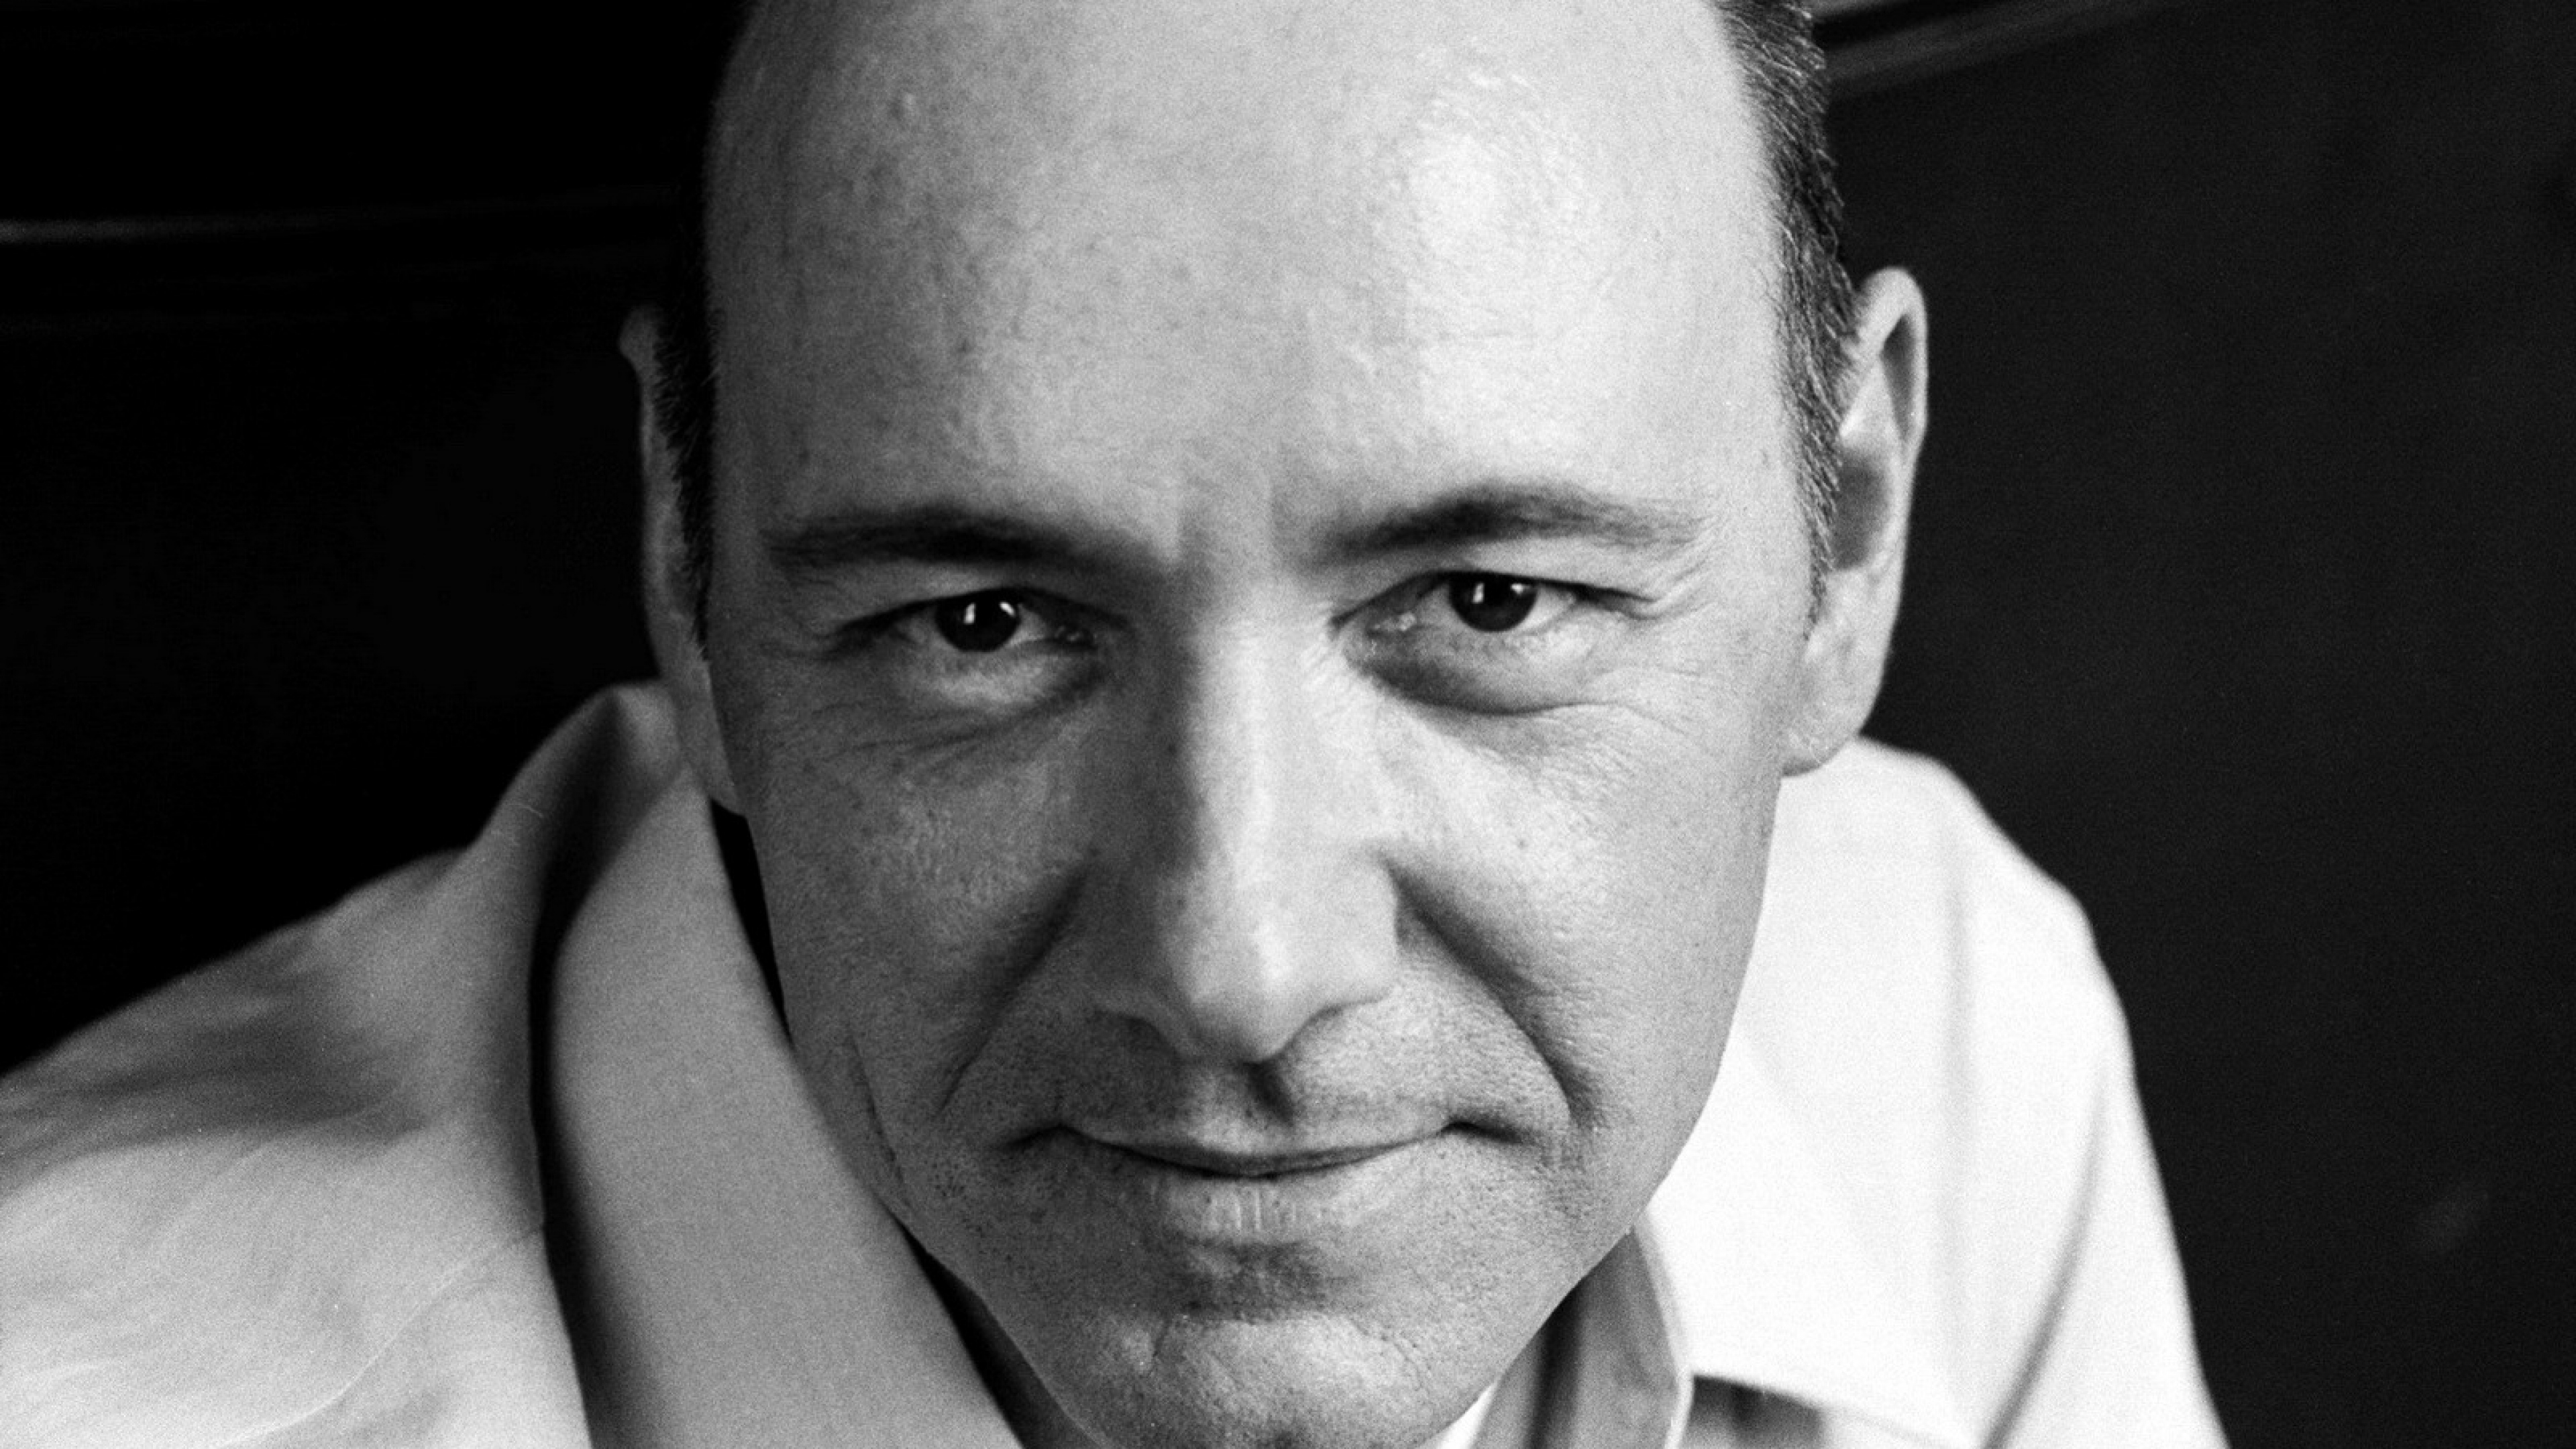 kevin spacey supportkevinspacey.com